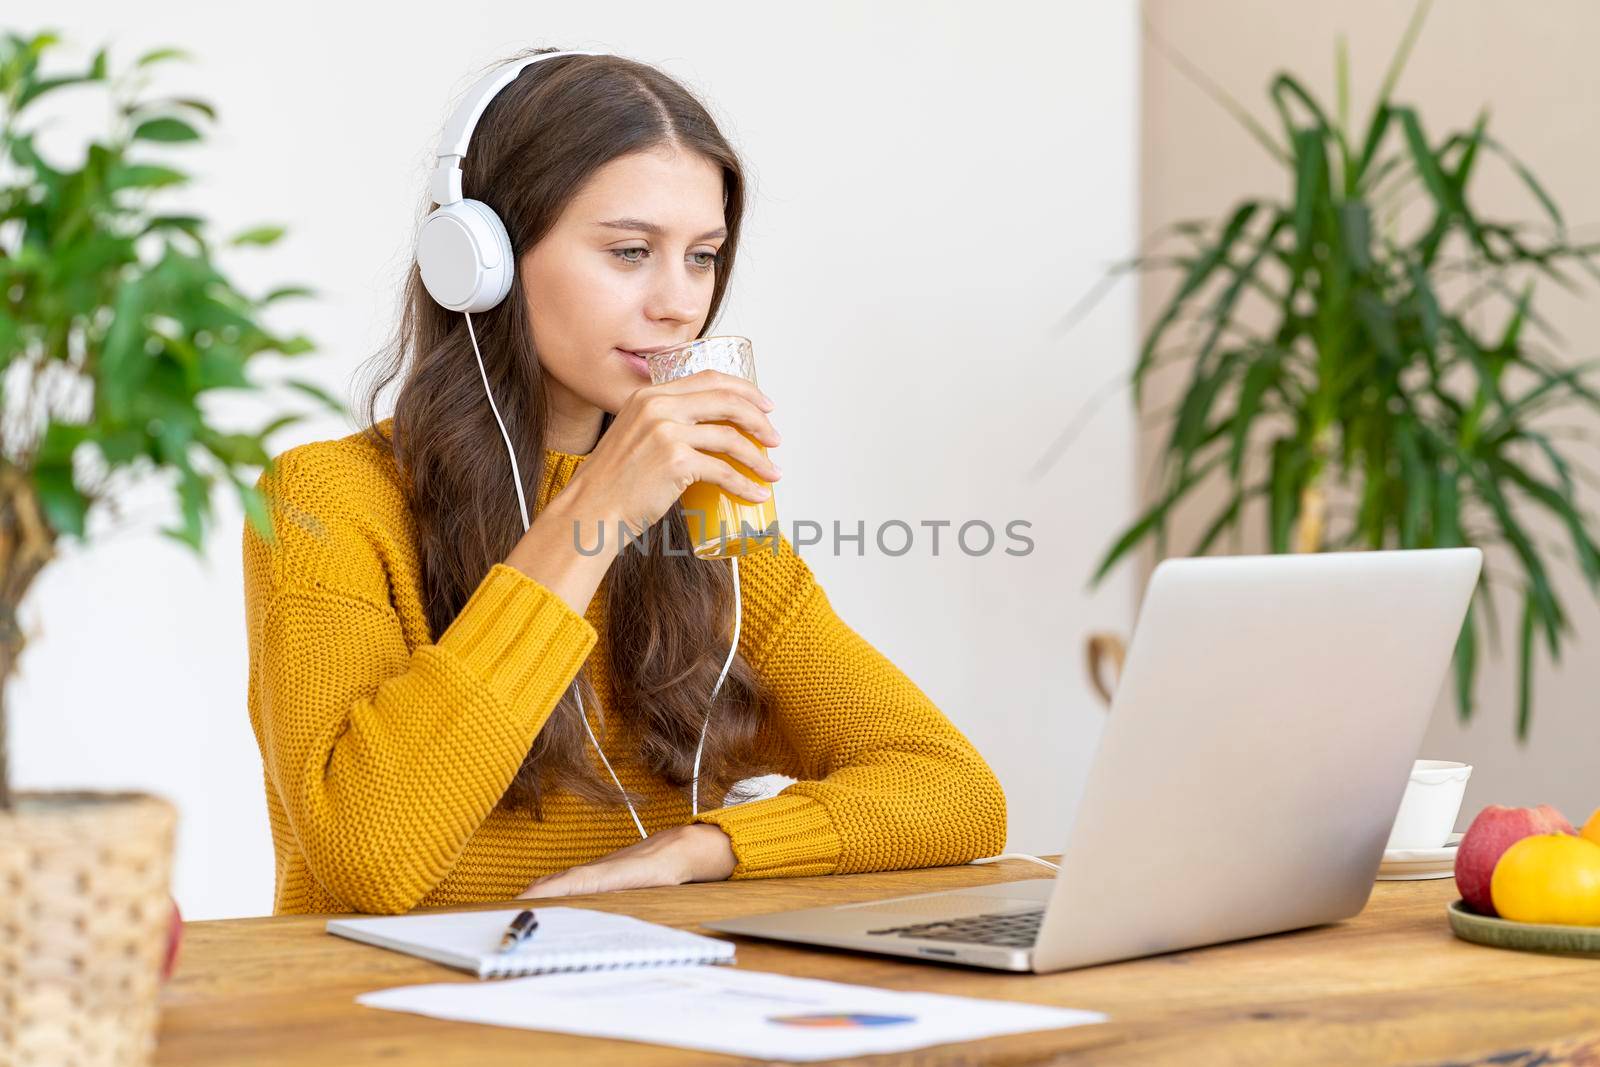 Young girl with headphones talking on conference calls,drinking orange juice, smiling. Beautiful woman with long hair in bright yellow sweater works remotely from home